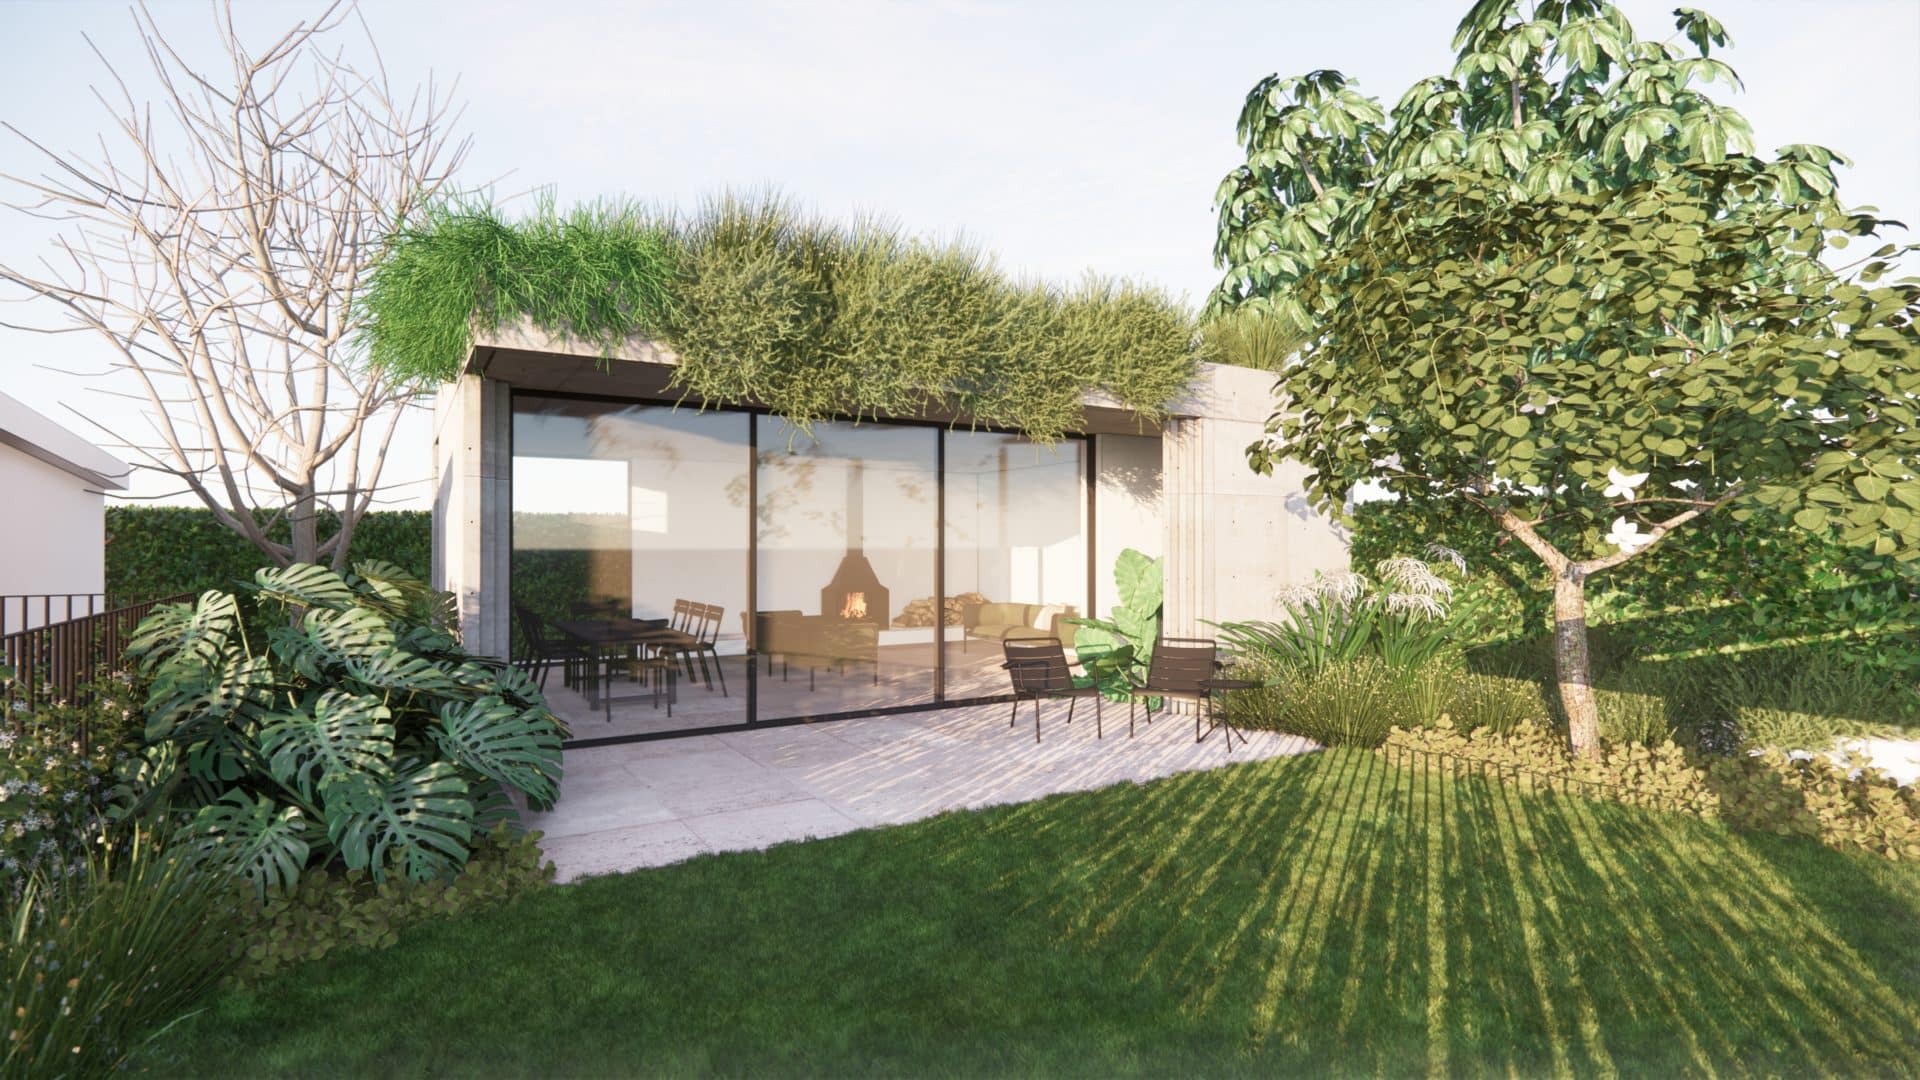 A landscape design illustration representing an outdoor room with a green roof